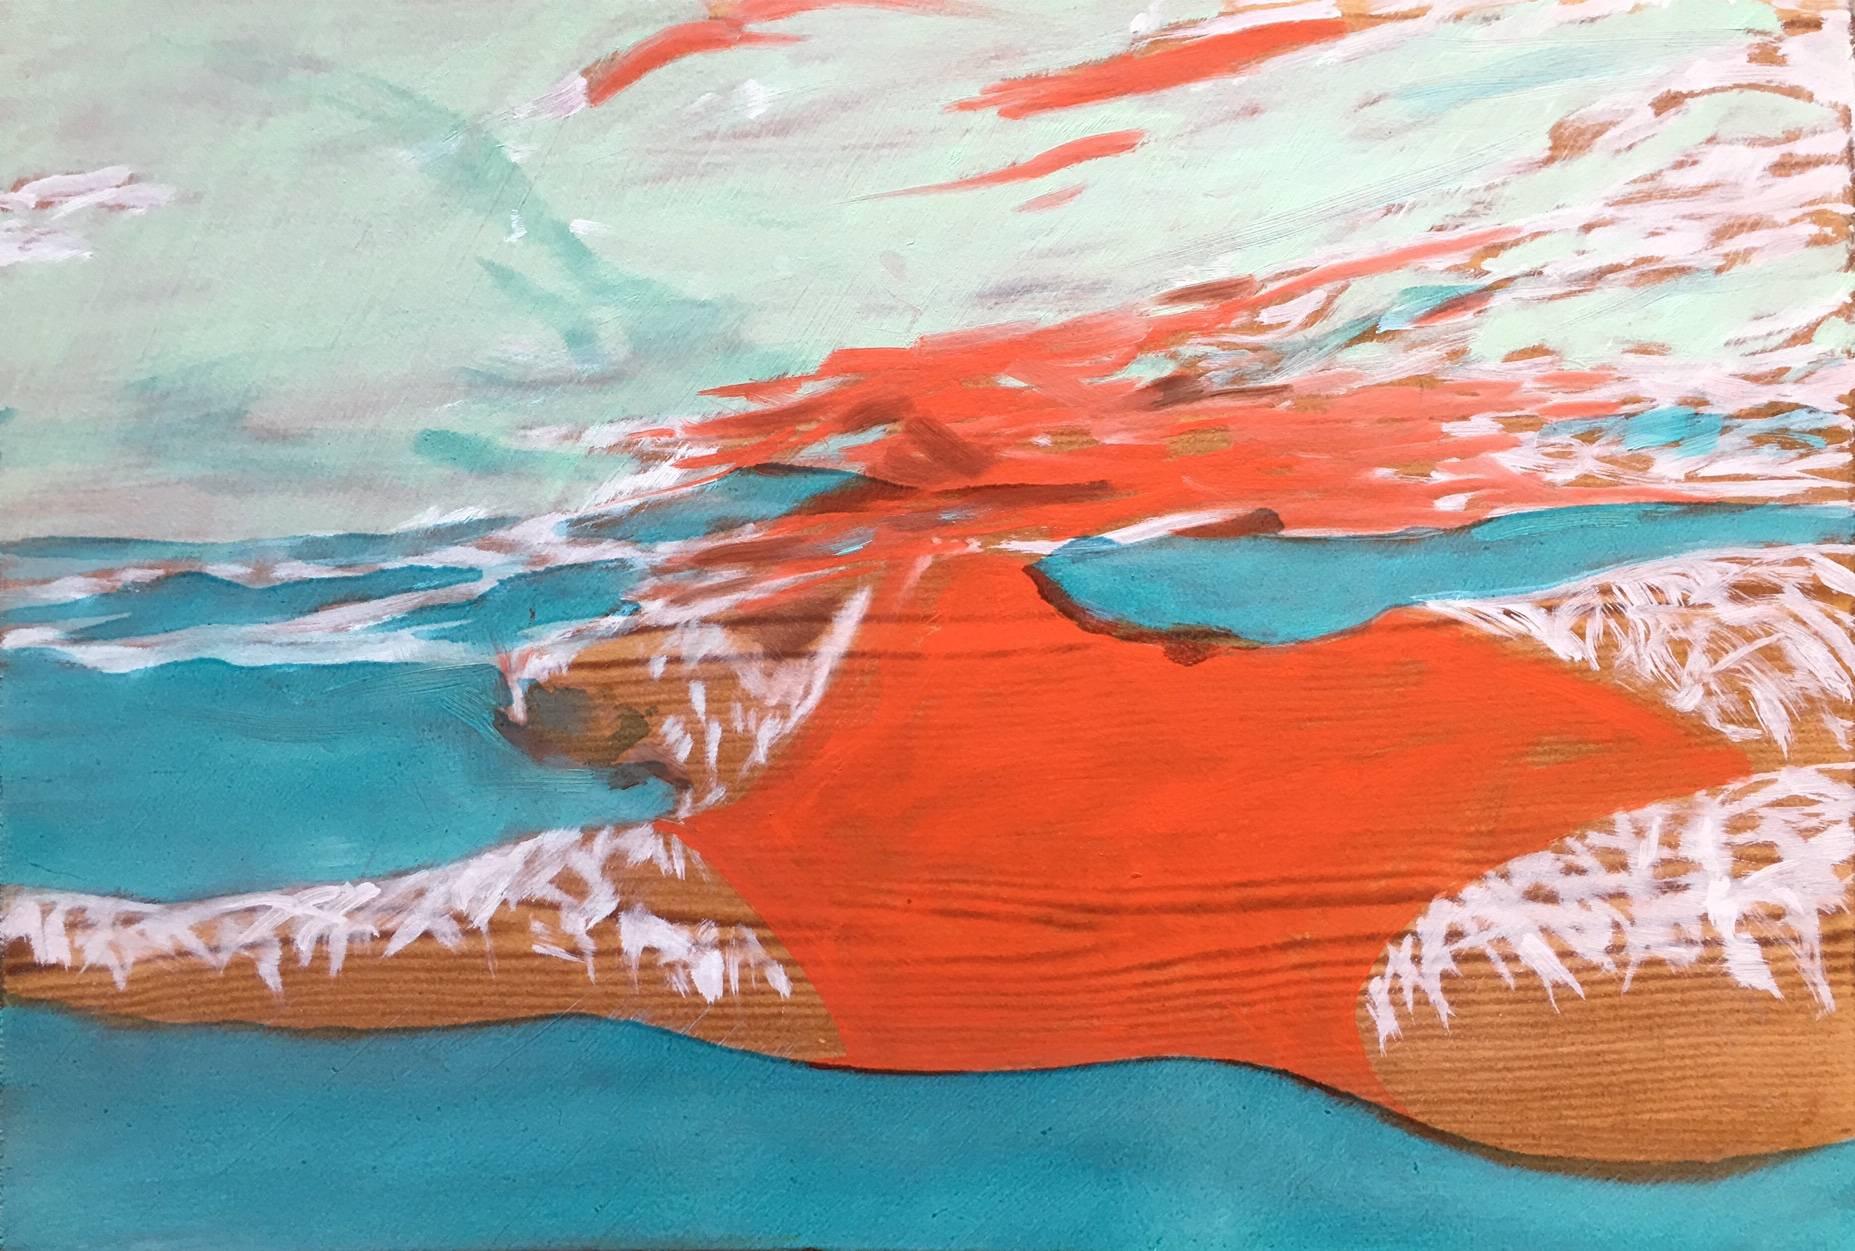 Carol Bennett Figurative Painting - "August Suspense (paper)" painting of a woman in a red swimsuit in a blue pool